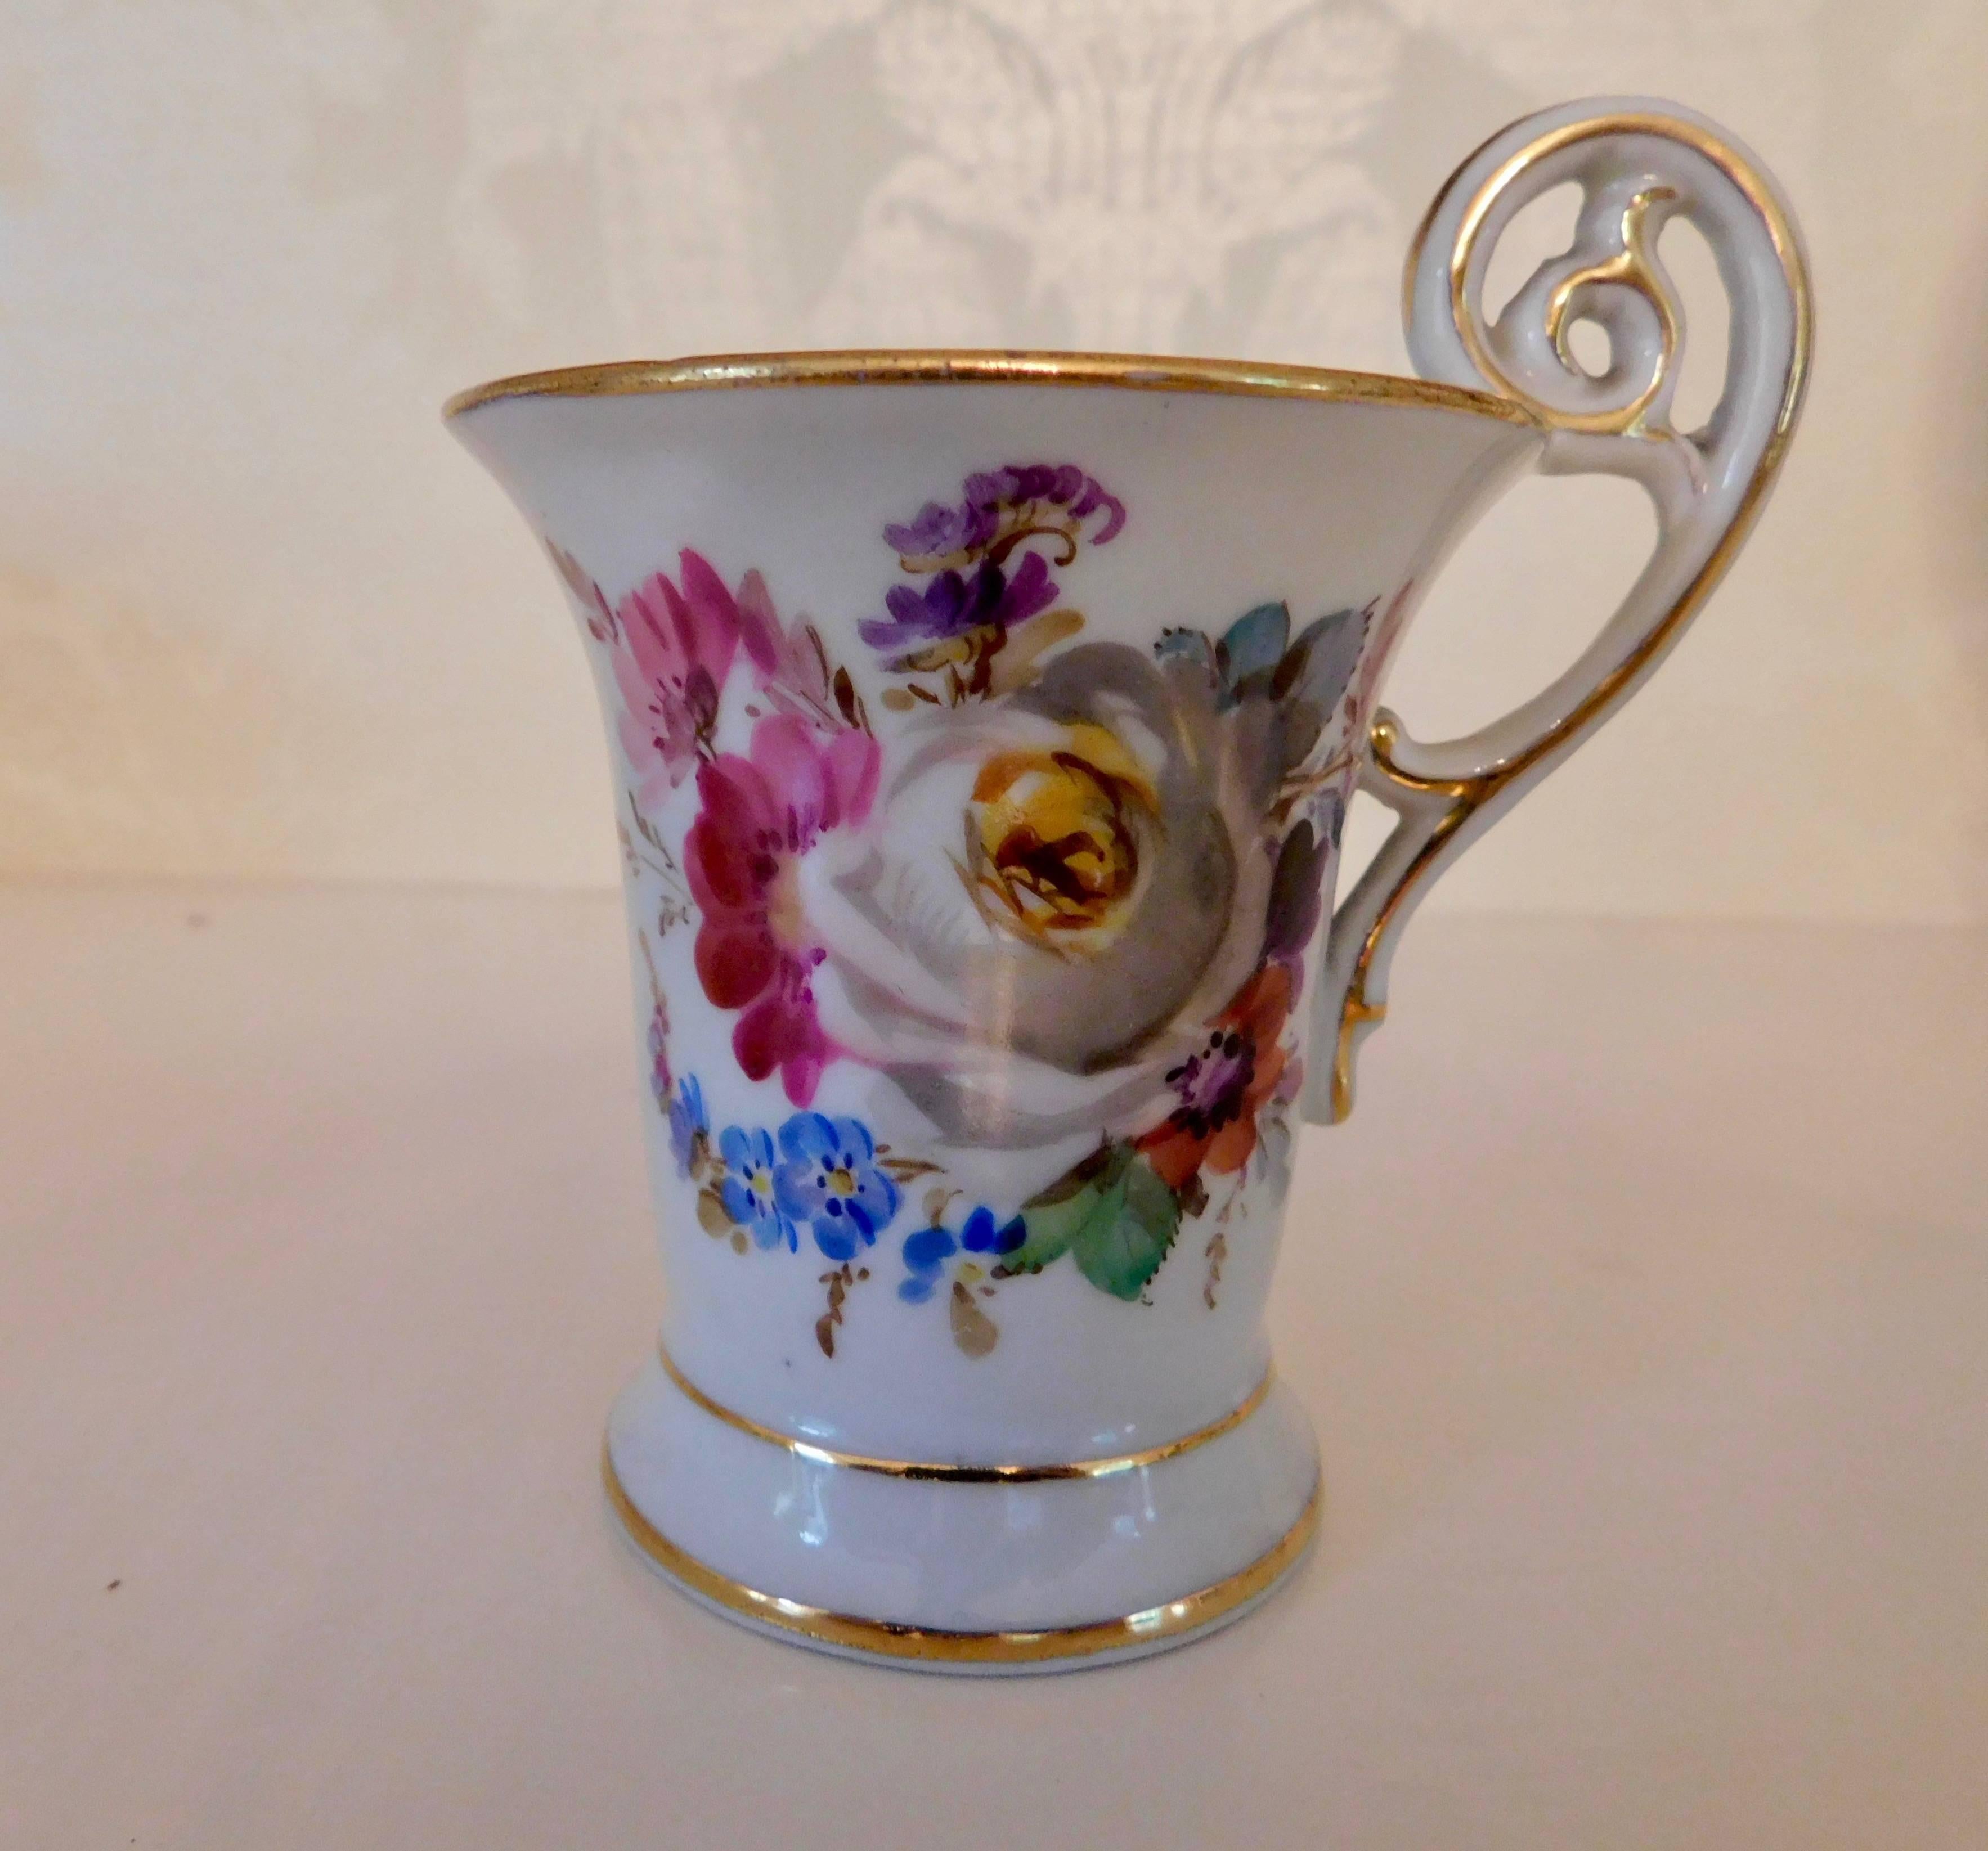 20th century Meissen Porcelain demitasse cup and saucer
Beautiful painted floral pattern with gold trim.
Measurements in inches:
Cup 2.13 D x 3.75 H
Saucer 4.5 D x 1 H.